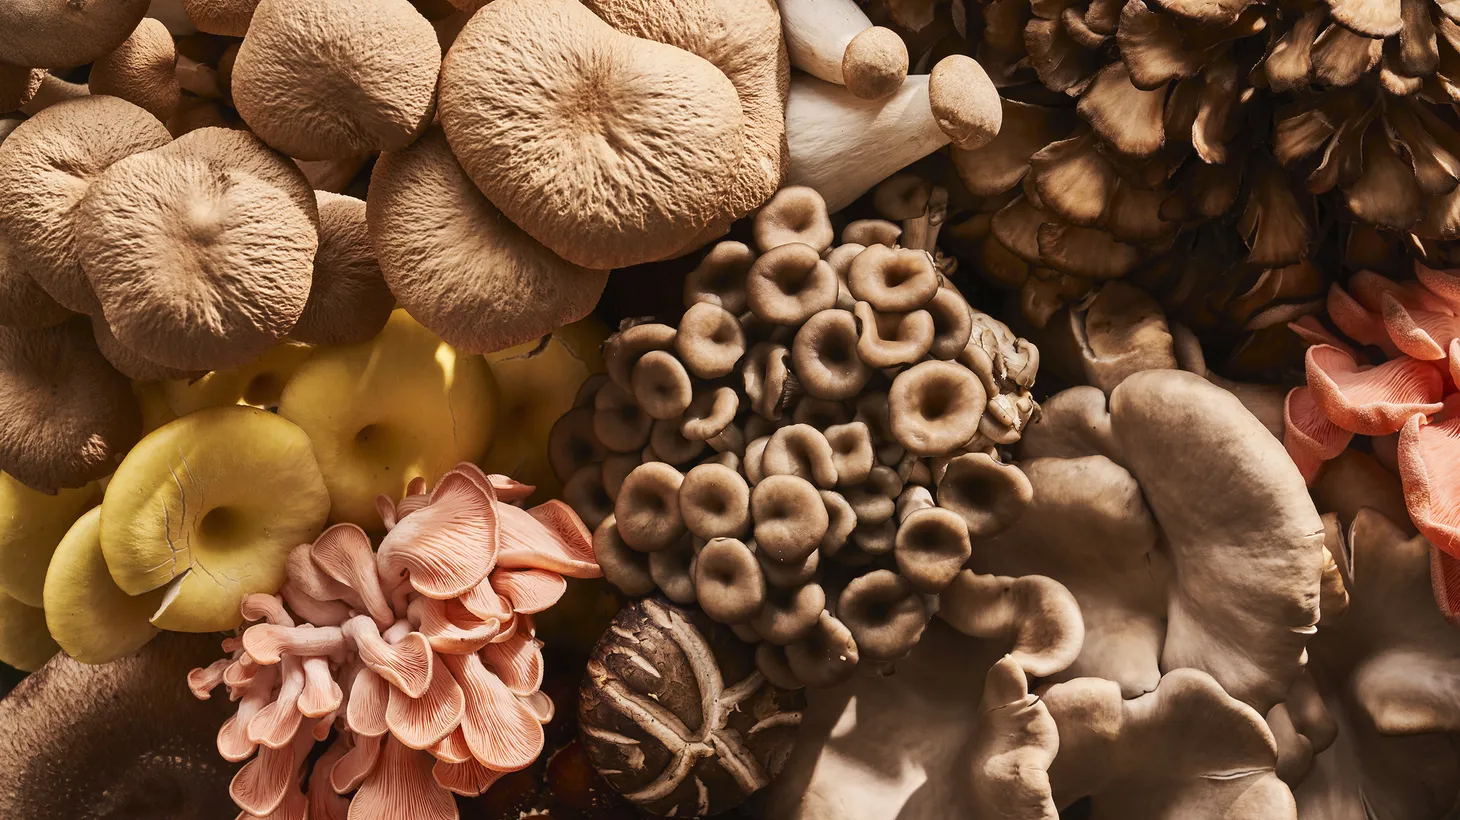 Mushrooms are being explored as meat alternatives because of their texture and strong umami flavor.